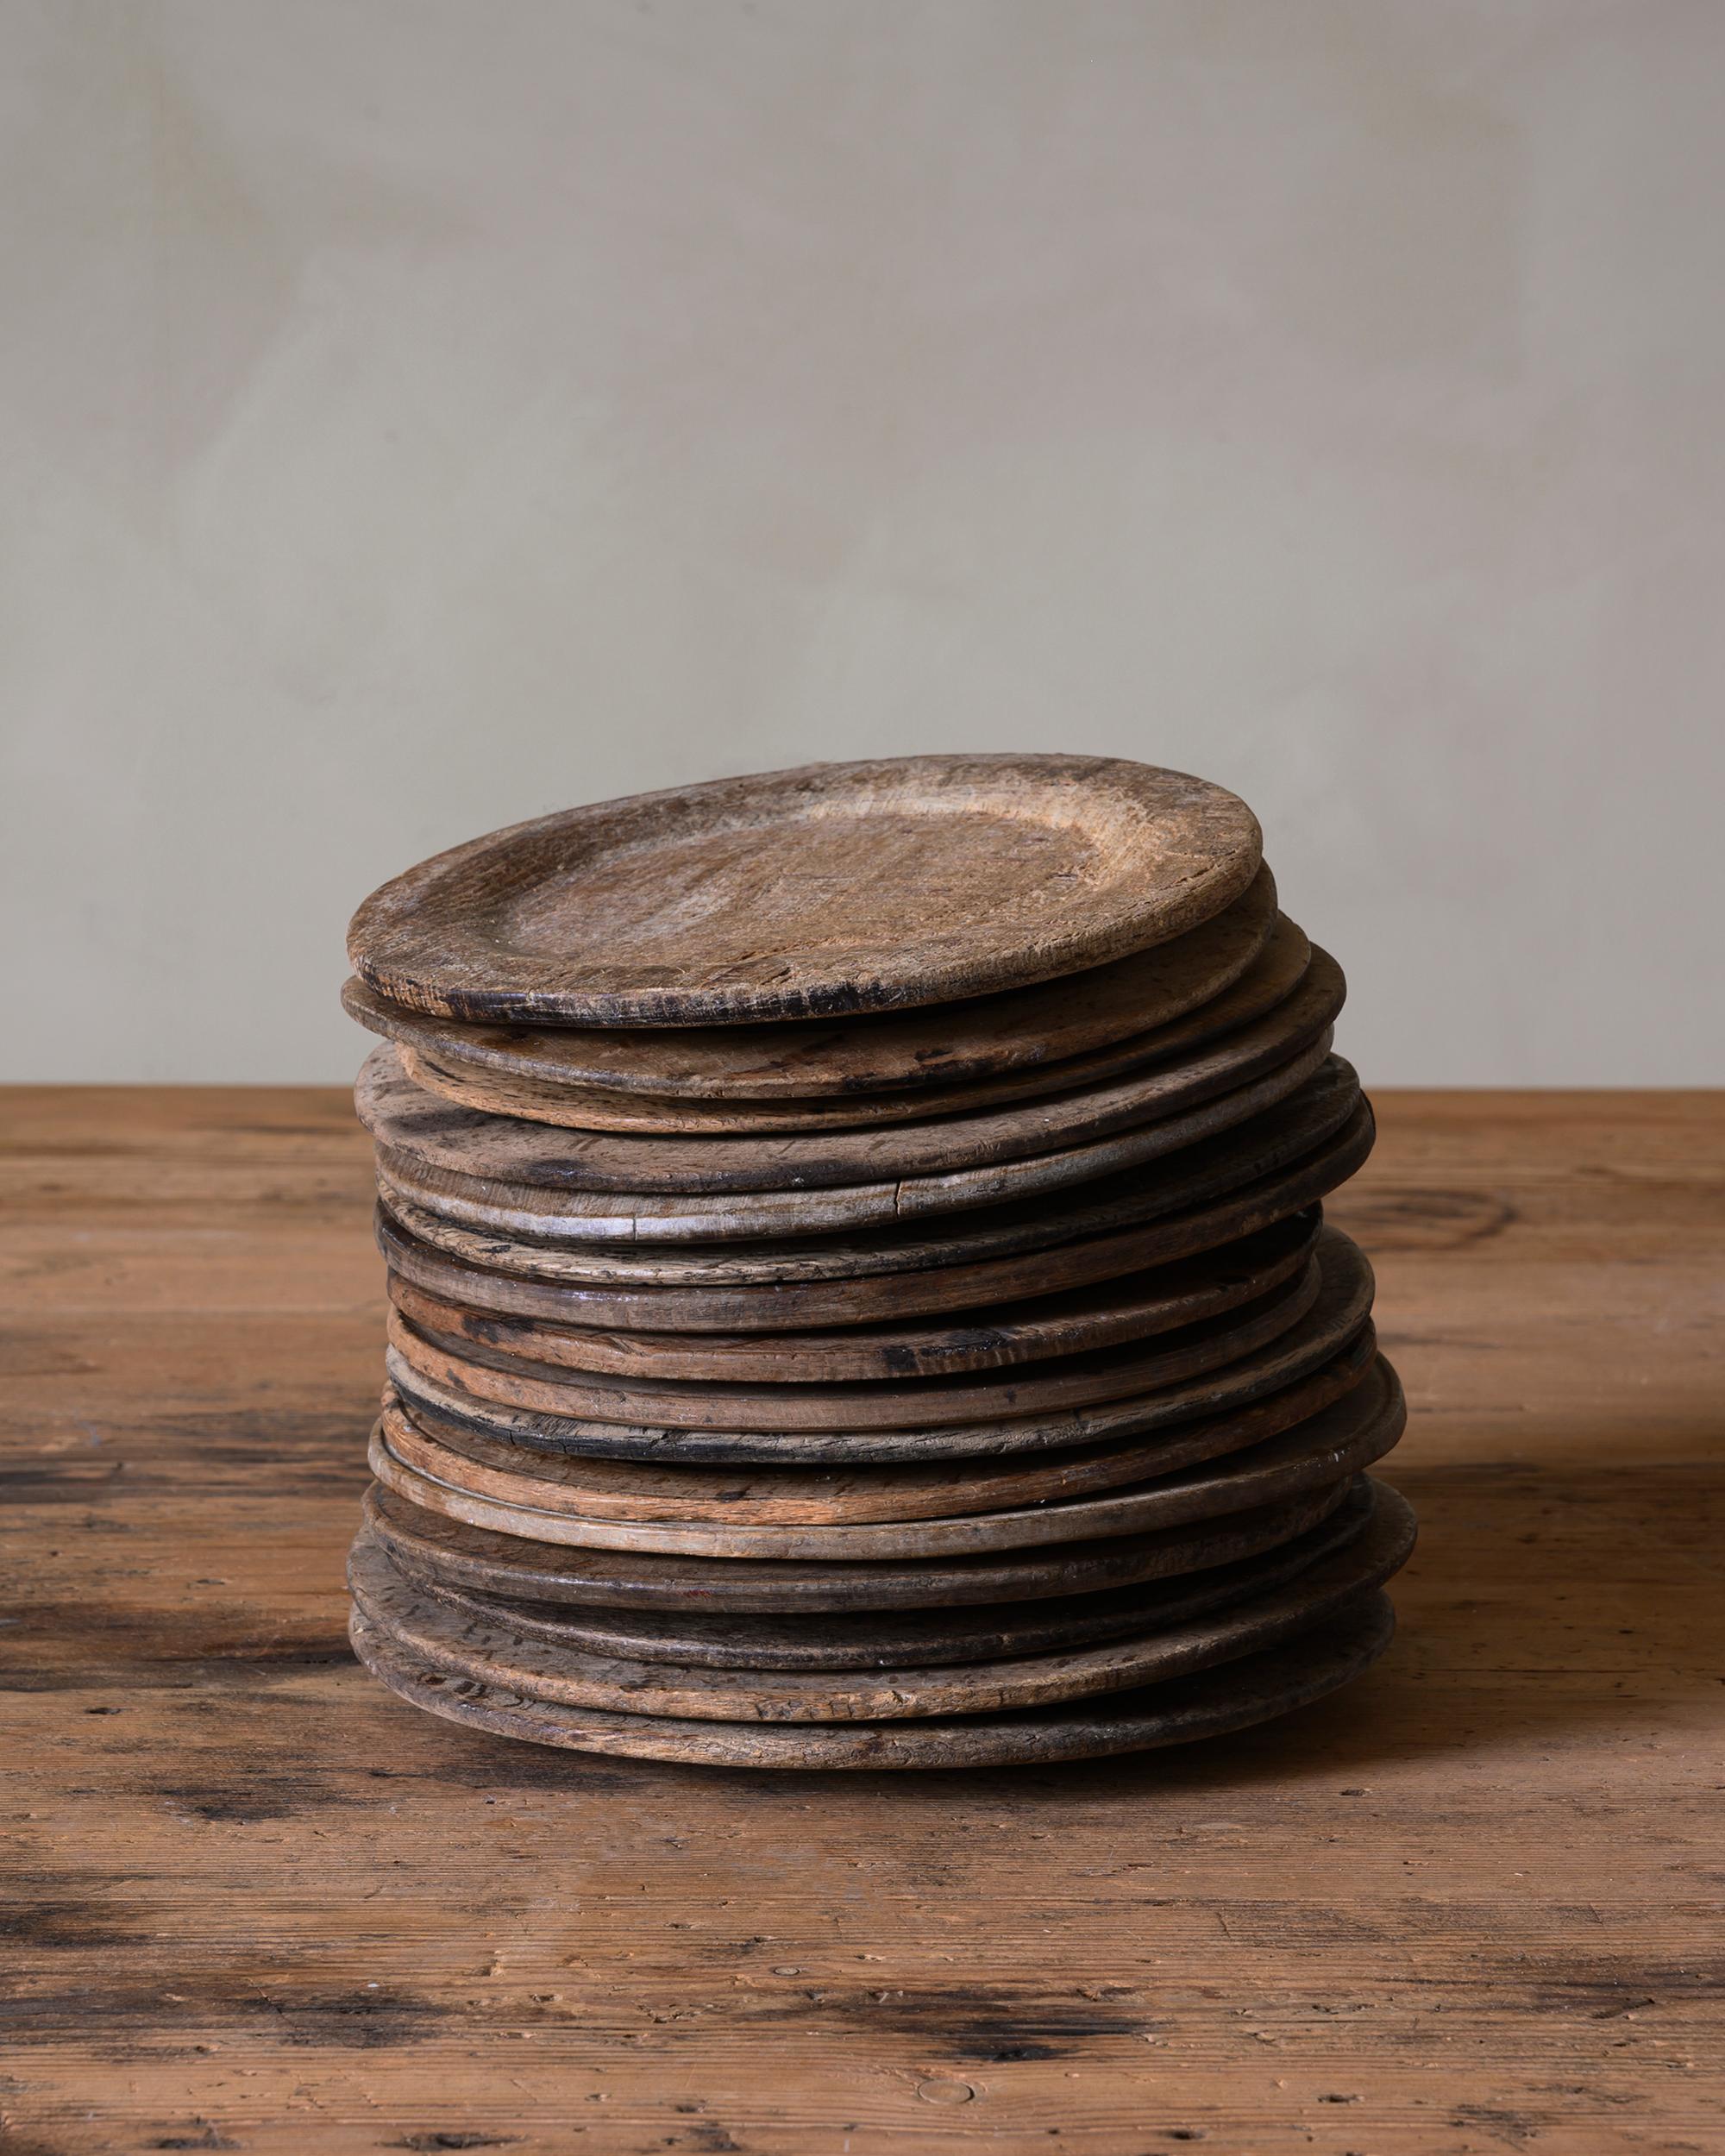 Charming set of 16 Swedish 18th - 19th century Folk Art wooden dinner plates. Dimensions: The diameter vary from 16 - 19 cm. Great for trays, platers or under-plates.